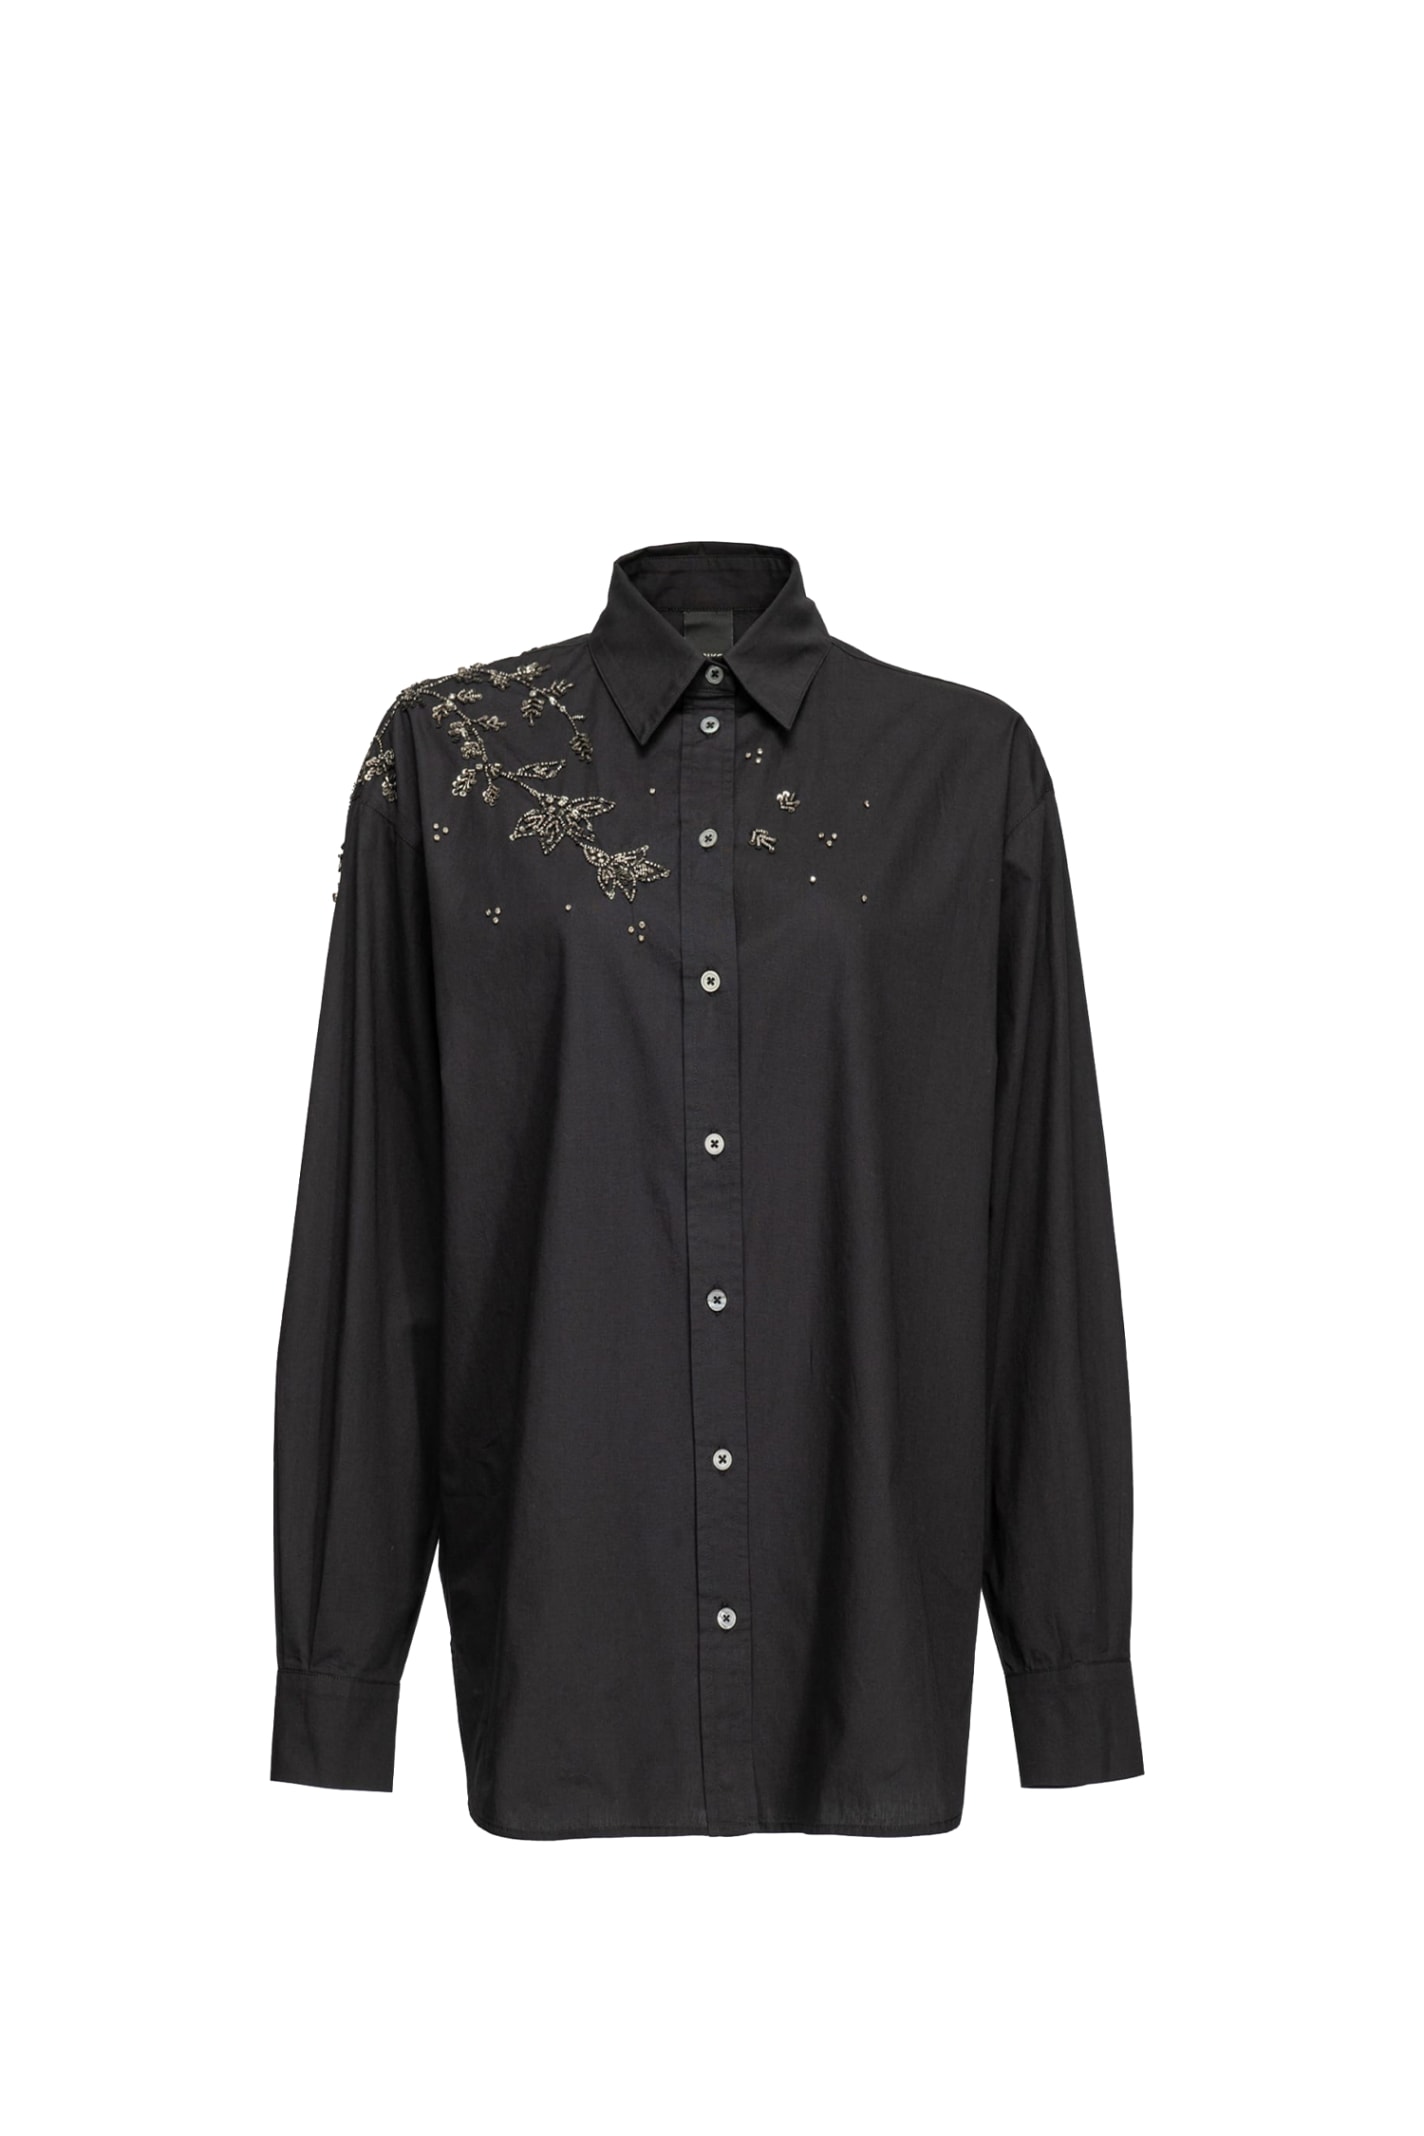 Pinko Poplin Shirt With Floral Embroidery